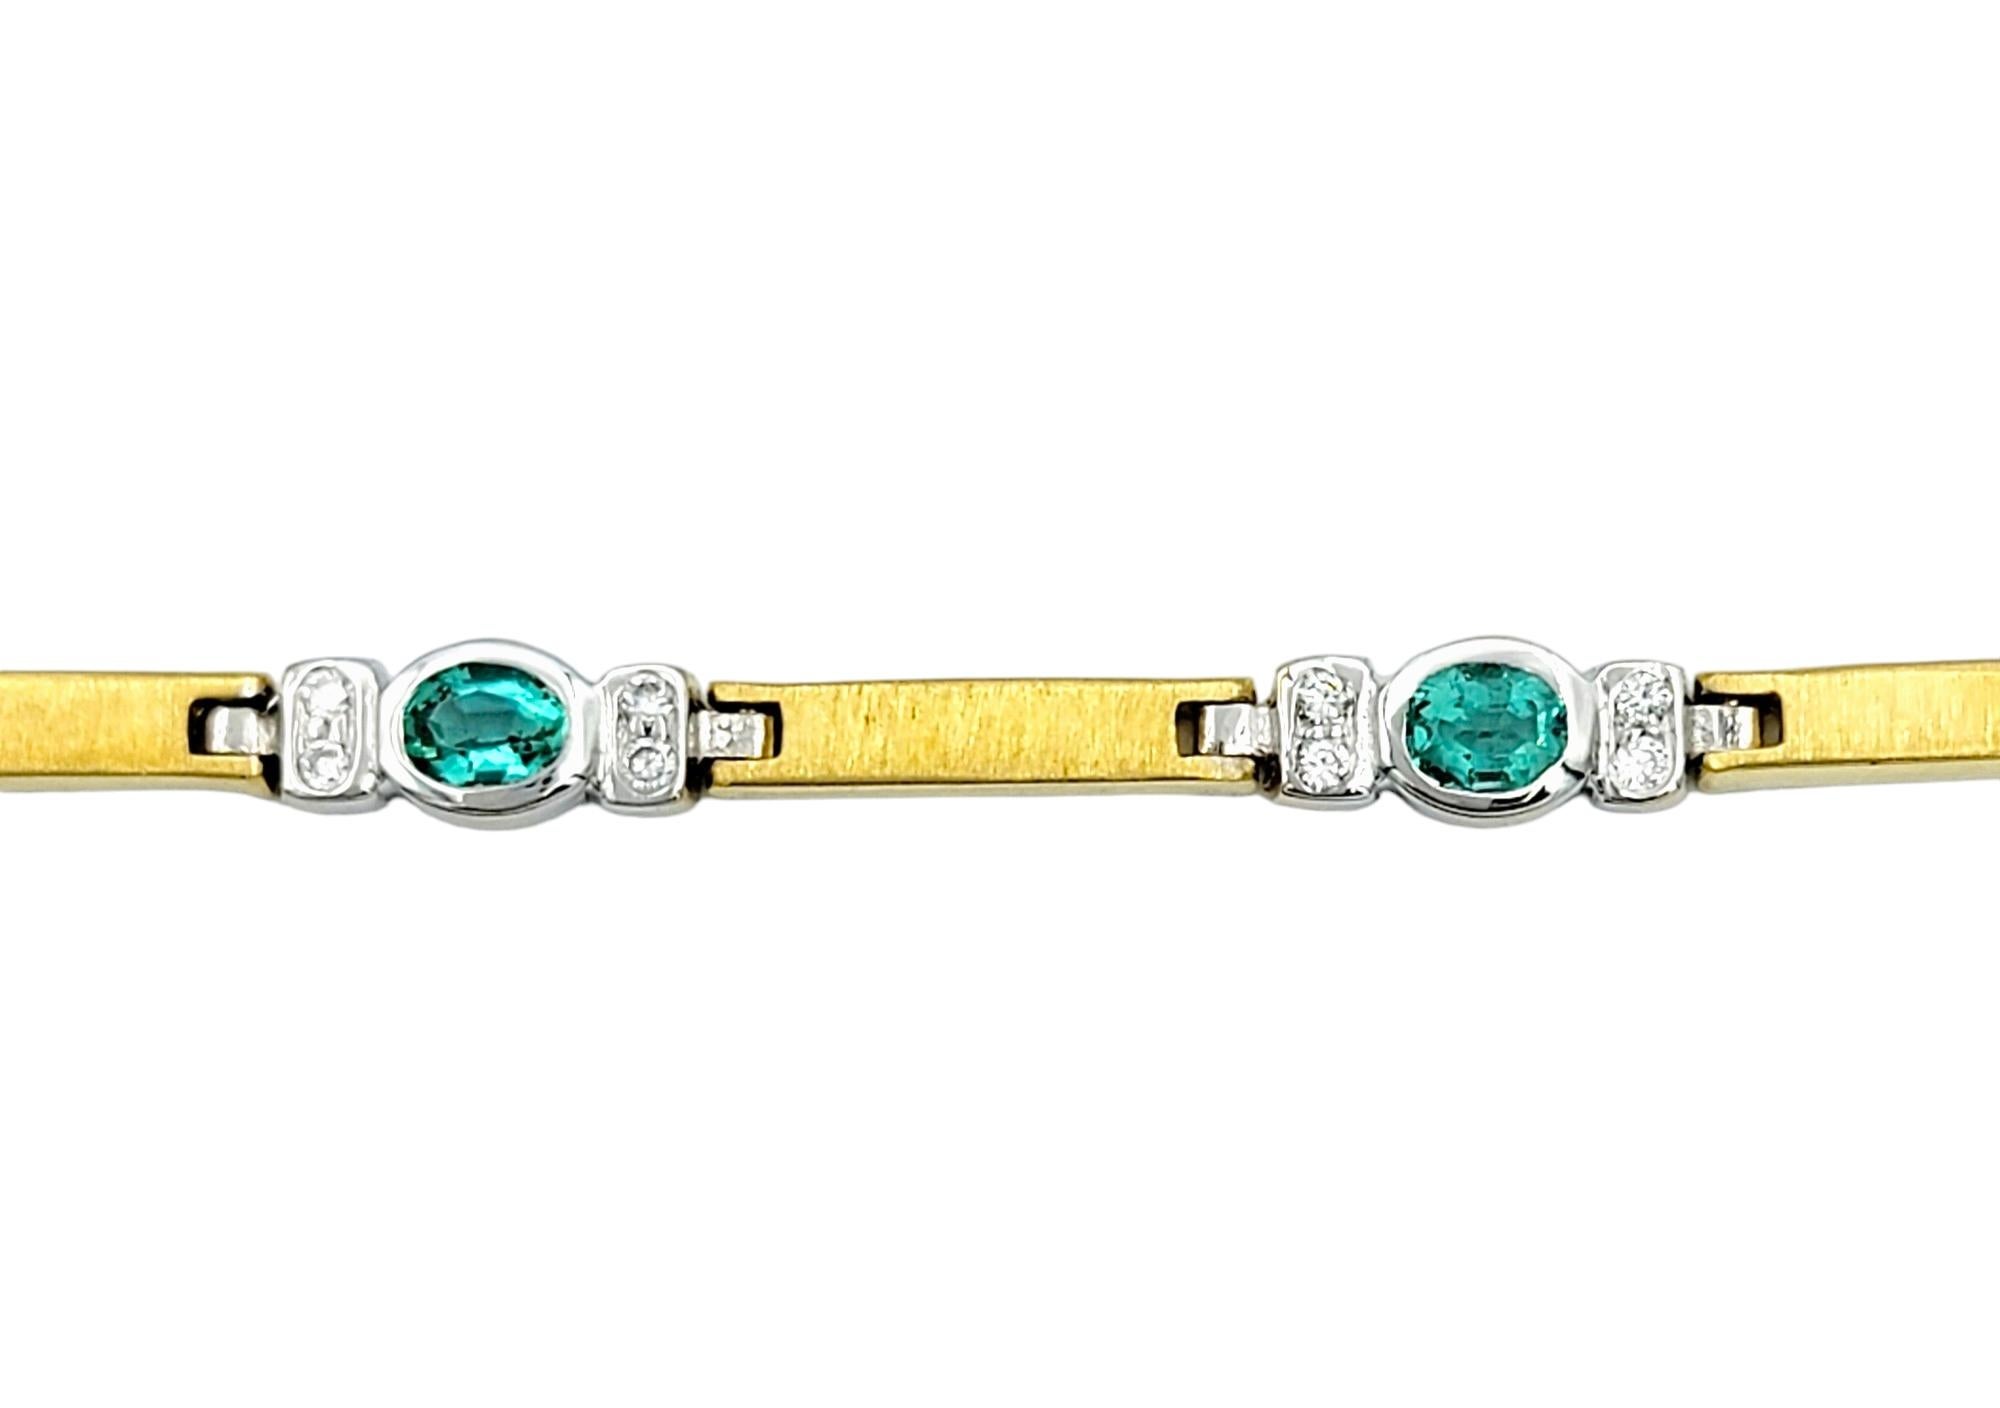 Contemporary Blue-Green Tourmaline and Diamond Link Bracelet Set in Two-Tone 18 Karat Gold For Sale